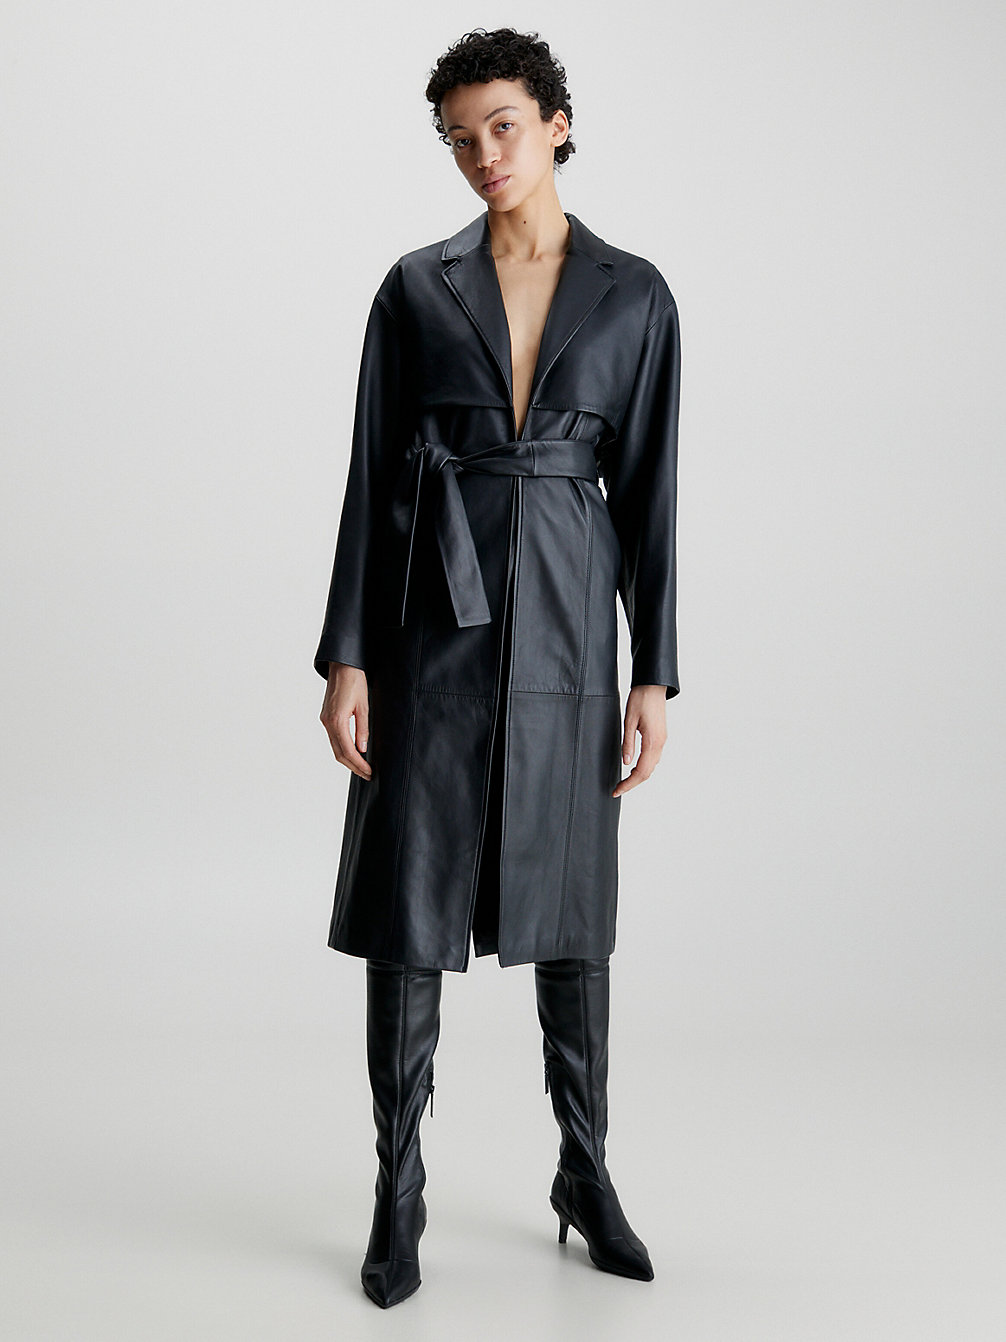 CK BLACK Leather Tailored Trench Coat undefined women Calvin Klein